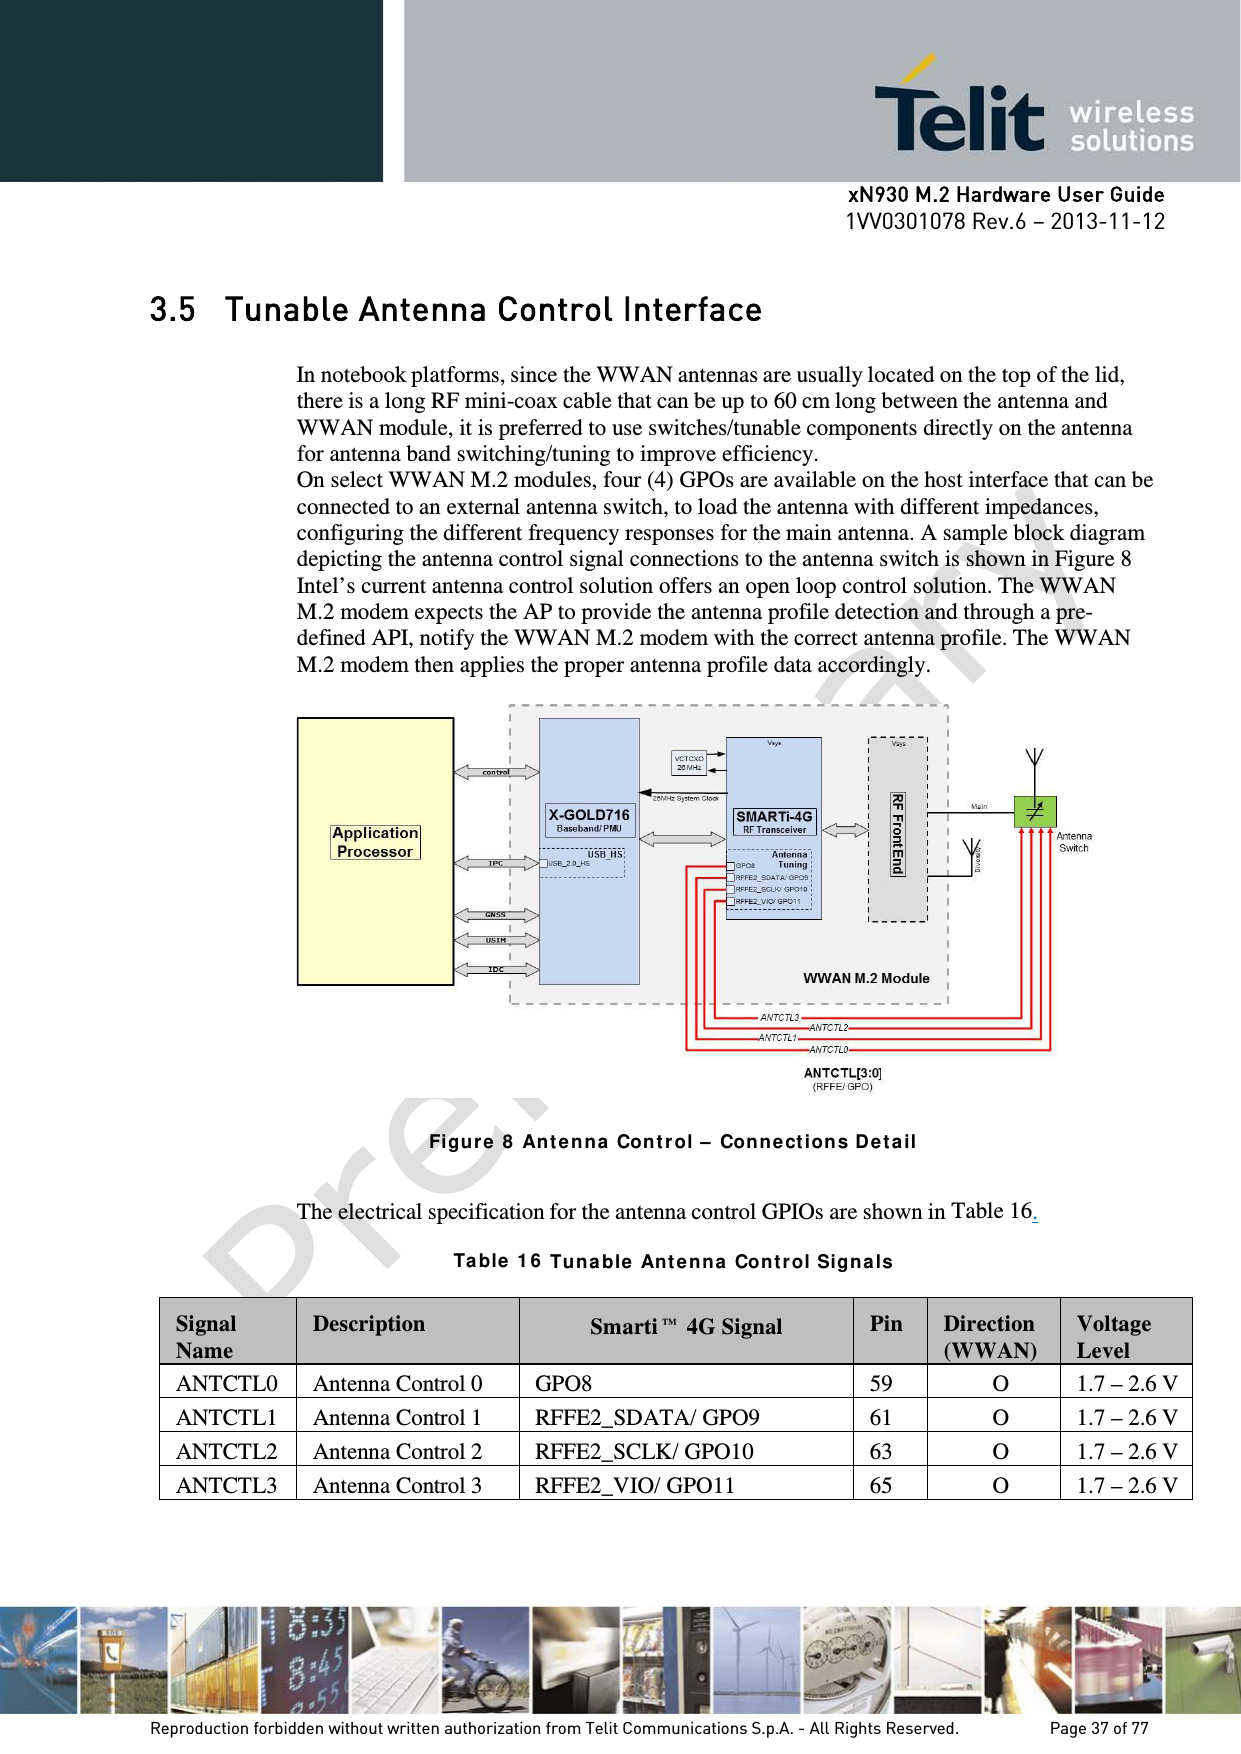      xN930 M.2 Hardware User Guide 1VV0301078 Rev.6 – 2013-11-12    3.5 Tunable Antenna Control Interface  In notebook platforms, since the WWAN antennas are usually located on the top of the lid, there is a long RF mini-coax cable that can be up to 60 cm long between the antenna and WWAN module, it is preferred to use switches/tunable components directly on the antenna for antenna band switching/tuning to improve efficiency. On select WWAN M.2 modules, four (4) GPOs are available on the host interface that can be connected to an external antenna switch, to load the antenna with different impedances, configuring the different frequency responses for the main antenna. A sample block diagram depicting the antenna control signal connections to the antenna switch is shown in Figure 8 Intel’s current antenna control solution offers an open loop control solution. The WWAN M.2 modem expects the AP to provide the antenna profile detection and through a pre-defined API, notify the WWAN M.2 modem with the correct antenna profile. The WWAN M.2 modem then applies the proper antenna profile data accordingly.    Figur e 8  Ant en na  Con tr ol –  Conne ct ion s De ta il  The electrical specification for the antenna control GPIOs are shown in Table 16.  Ta ble  1 6  Tuna ble  Ant e nn a  Cont rol Sign als  Signal Name  Description Smarti™ 4G Signal  Pin  Direction (WWAN)  Voltage Level ANTCTL0 Antenna Control 0 GPO8 59 O 1.7 – 2.6 V ANTCTL1 Antenna Control 1 RFFE2_SDATA/ GPO9 61 O 1.7 – 2.6 V ANTCTL2 Antenna Control 2 RFFE2_SCLK/ GPO10 63 O 1.7 – 2.6 V ANTCTL3 Antenna Control 3 RFFE2_VIO/ GPO11 65 O 1.7 – 2.6 V     Reproduction forbidden without written authorization from Telit Communications S.p.A. - All Rights Reserved.    Page 37 of 77 